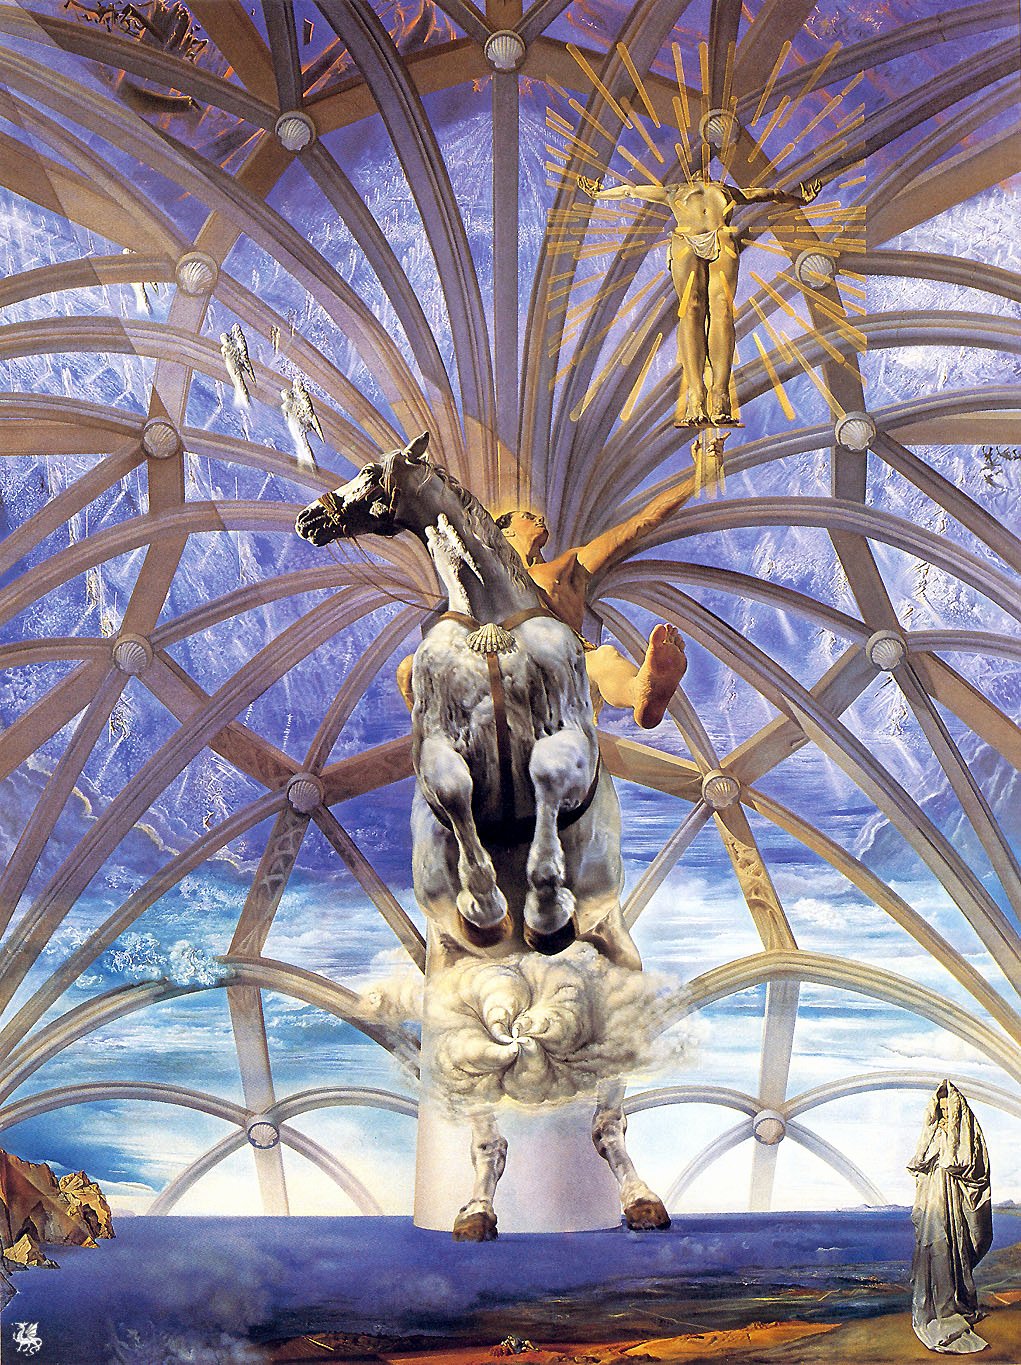 Images Of Salvador Dali Paintings Best Of Salvador Dali S Mathematical Obsession Adlandpro